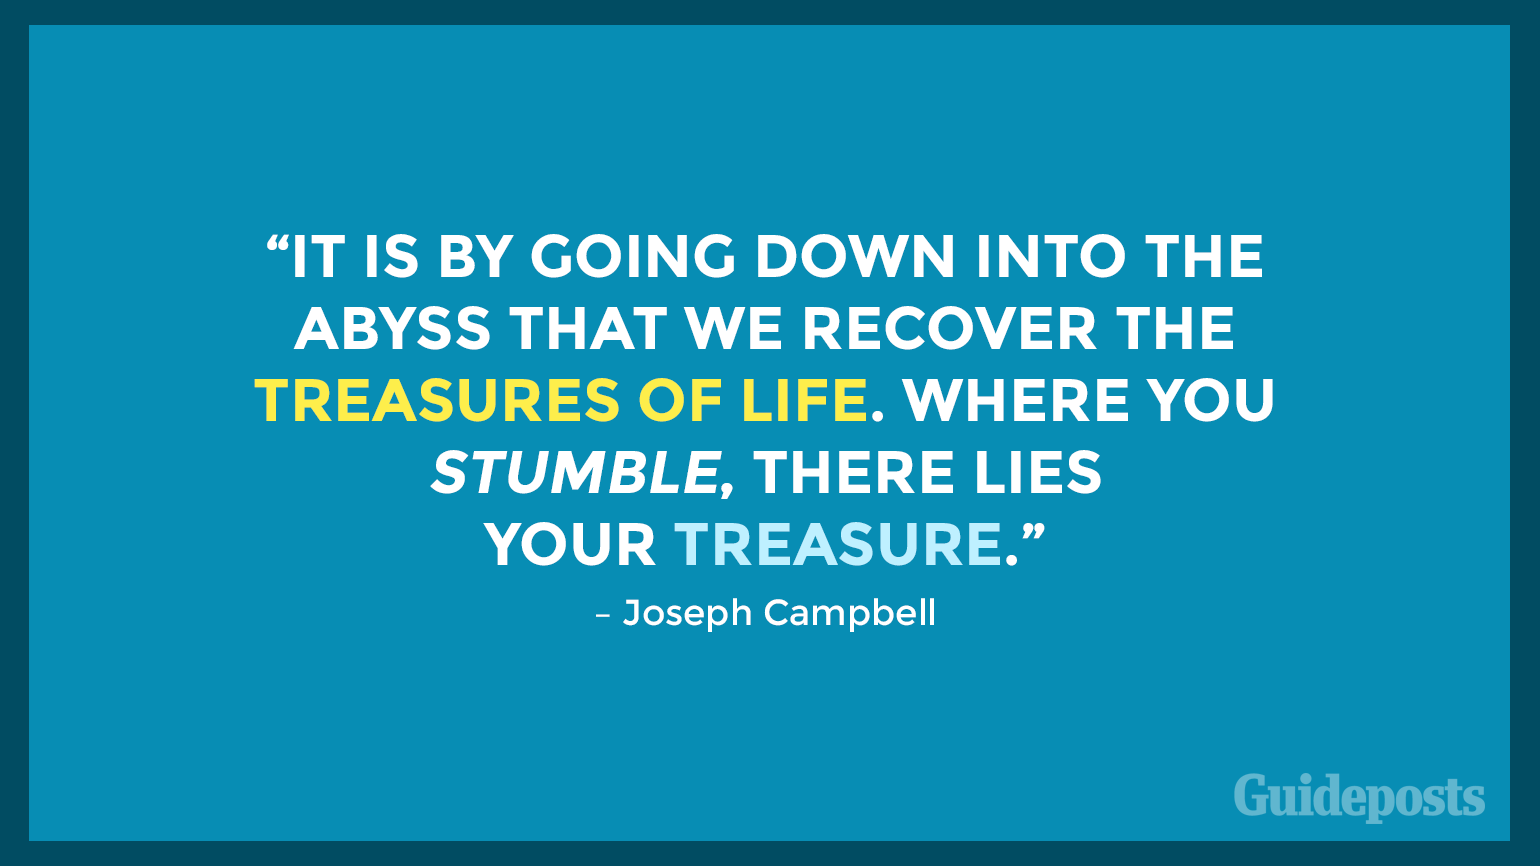 “It is by going down into the abyss that we recover the treasures of life. Where you stumble, there lies your treasure.” – Joseph Campbell